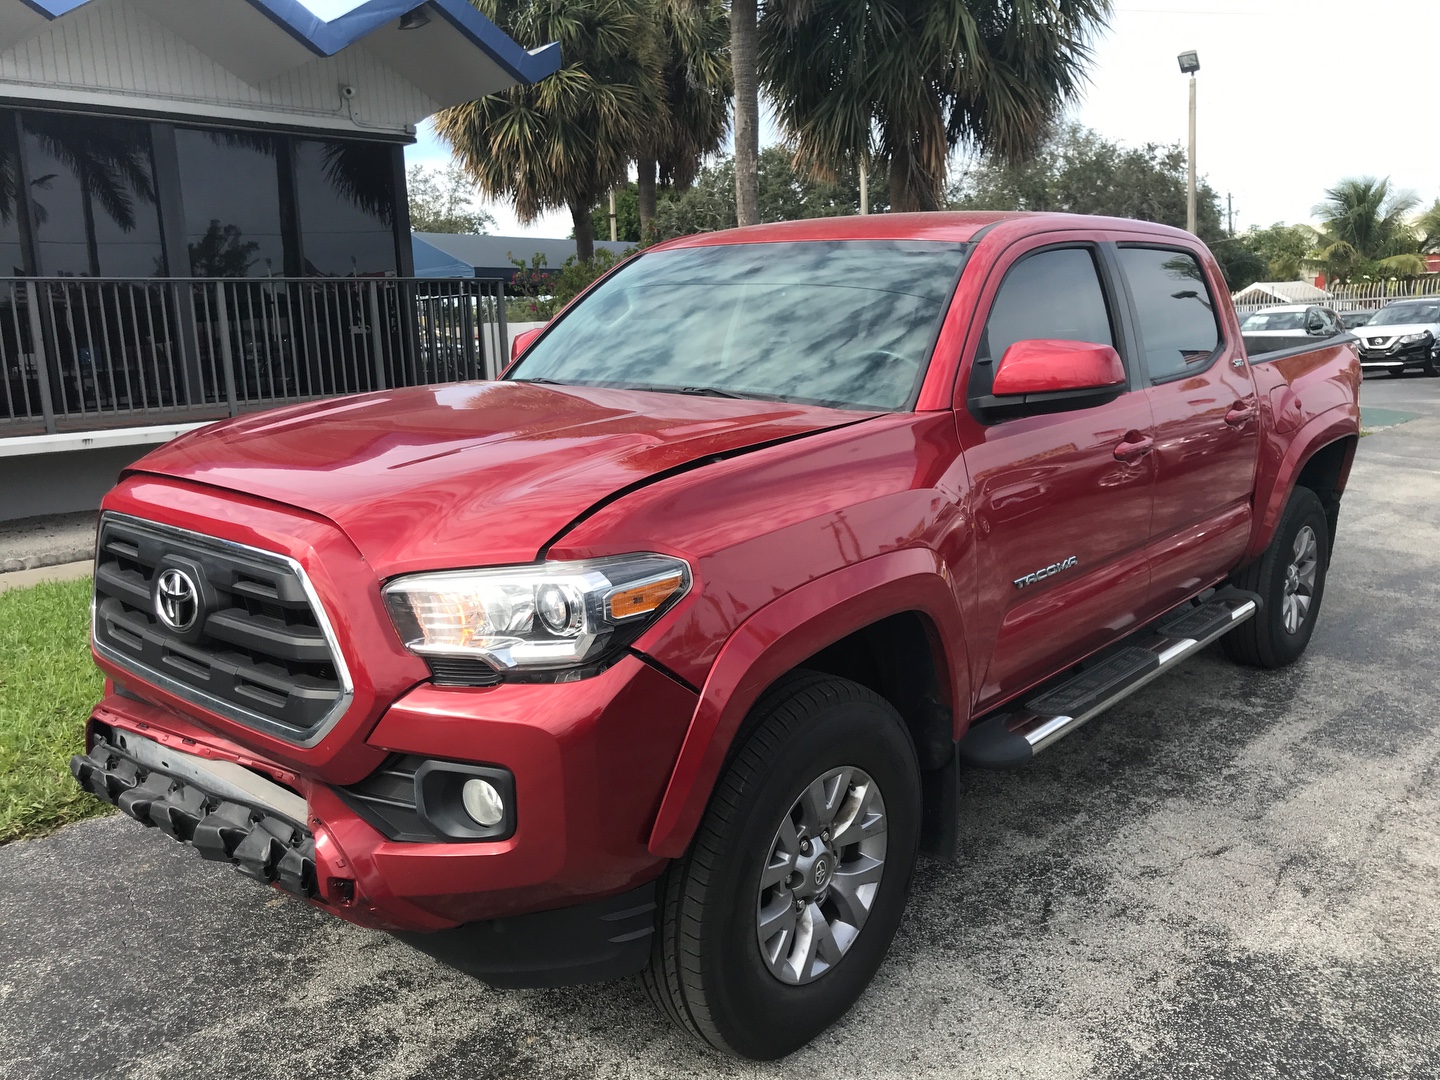  2016 Toyota Tacoma Exterior Colors for Living room